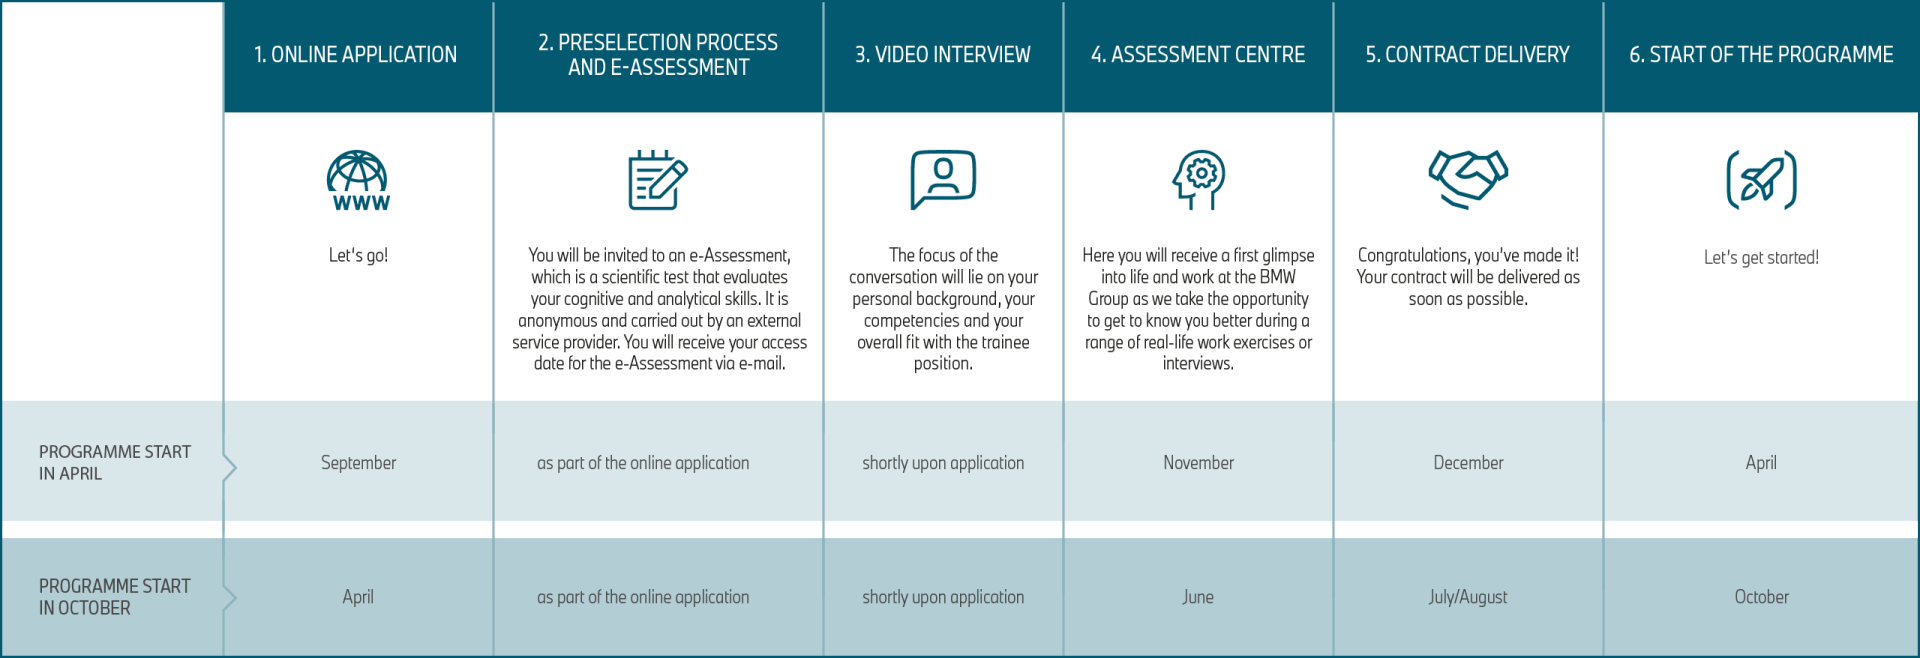 The graph shows the application process to the AcceleratiON programme.